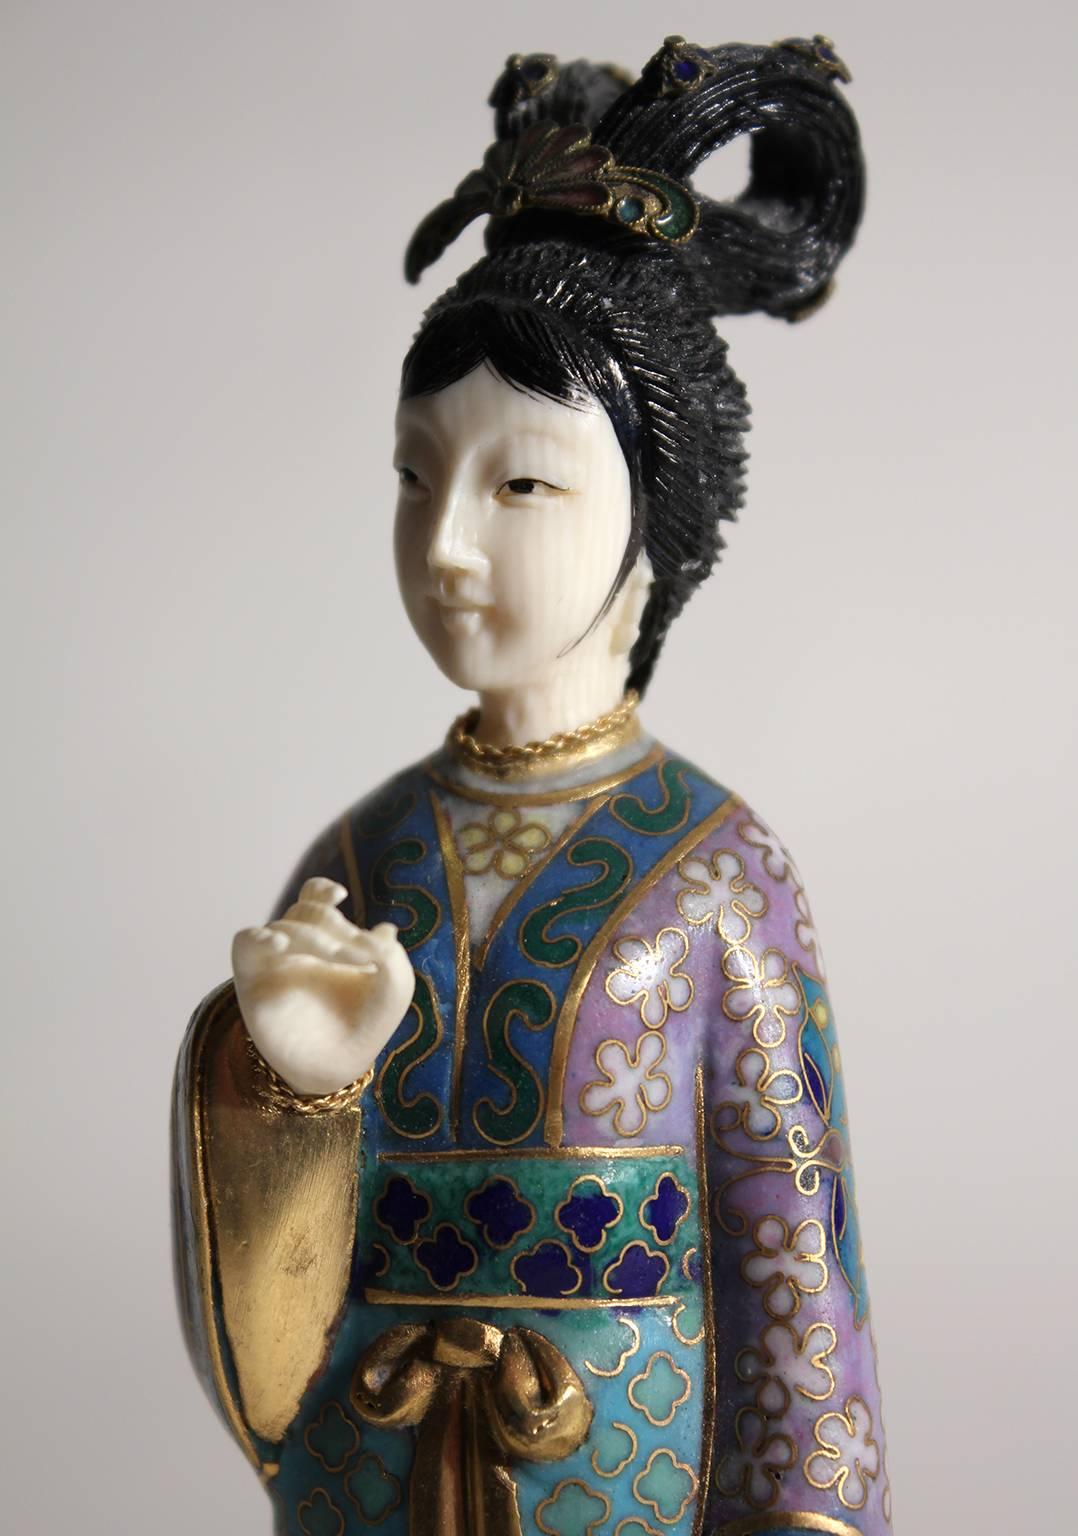 Antique Chinese Cloisonne Enameled Carved Guanyin Quan Yin Sculpture Figurine For Sale 3